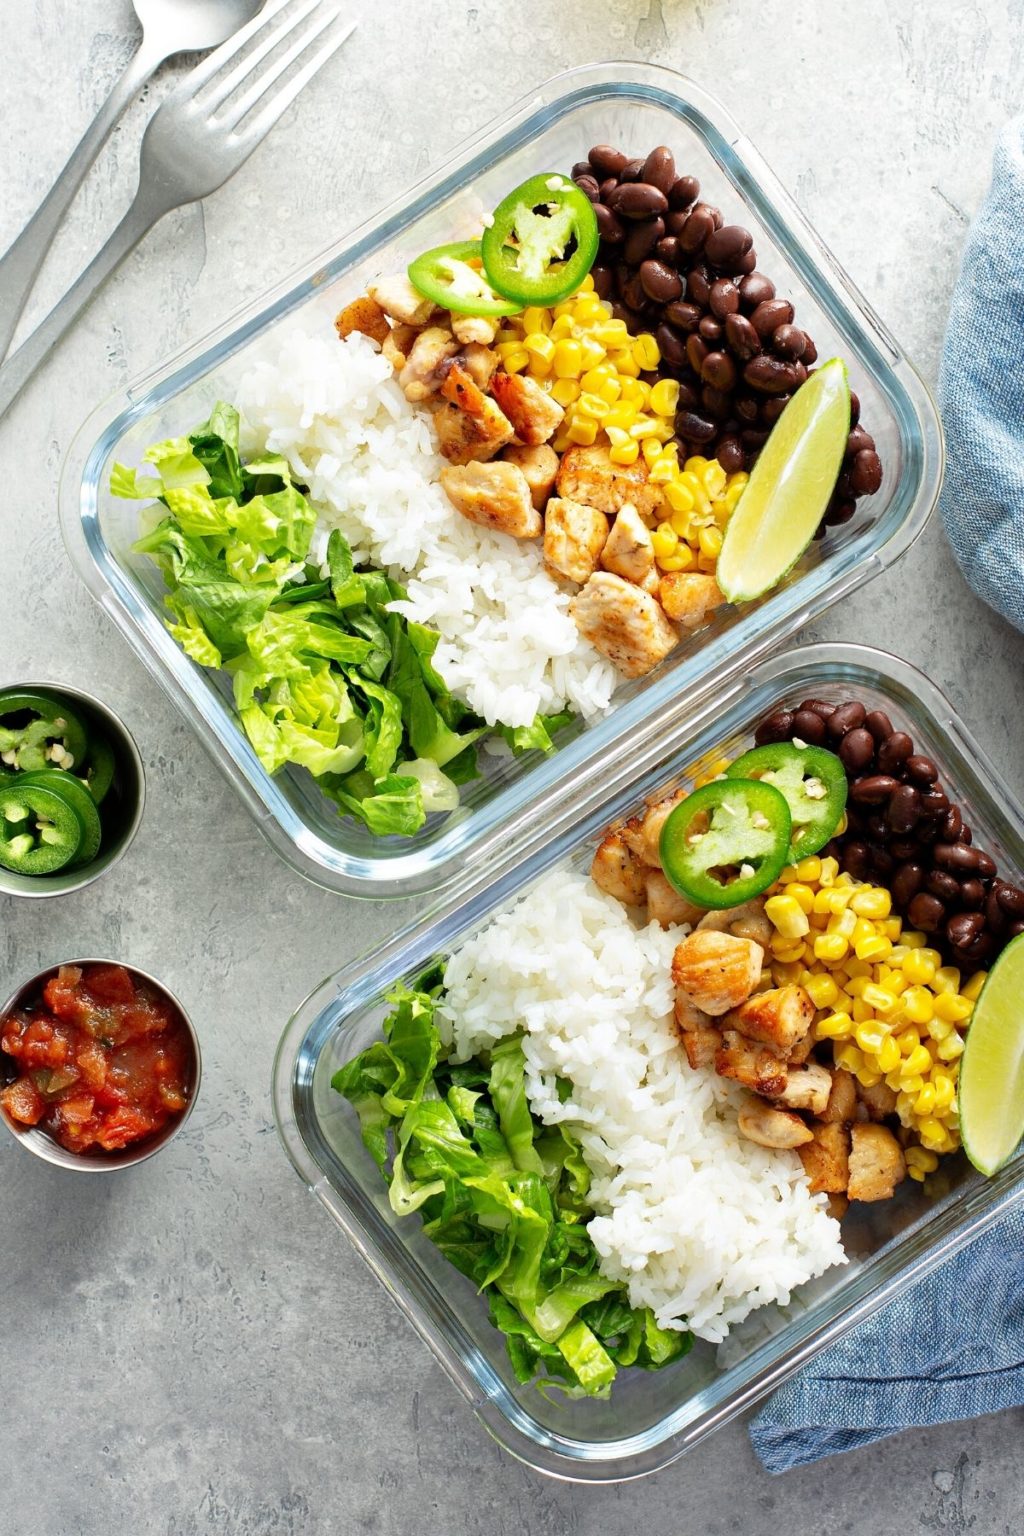 10+ Meal Prep Tips for Beginners (Clean Eating) - Clean Eating Kitchen